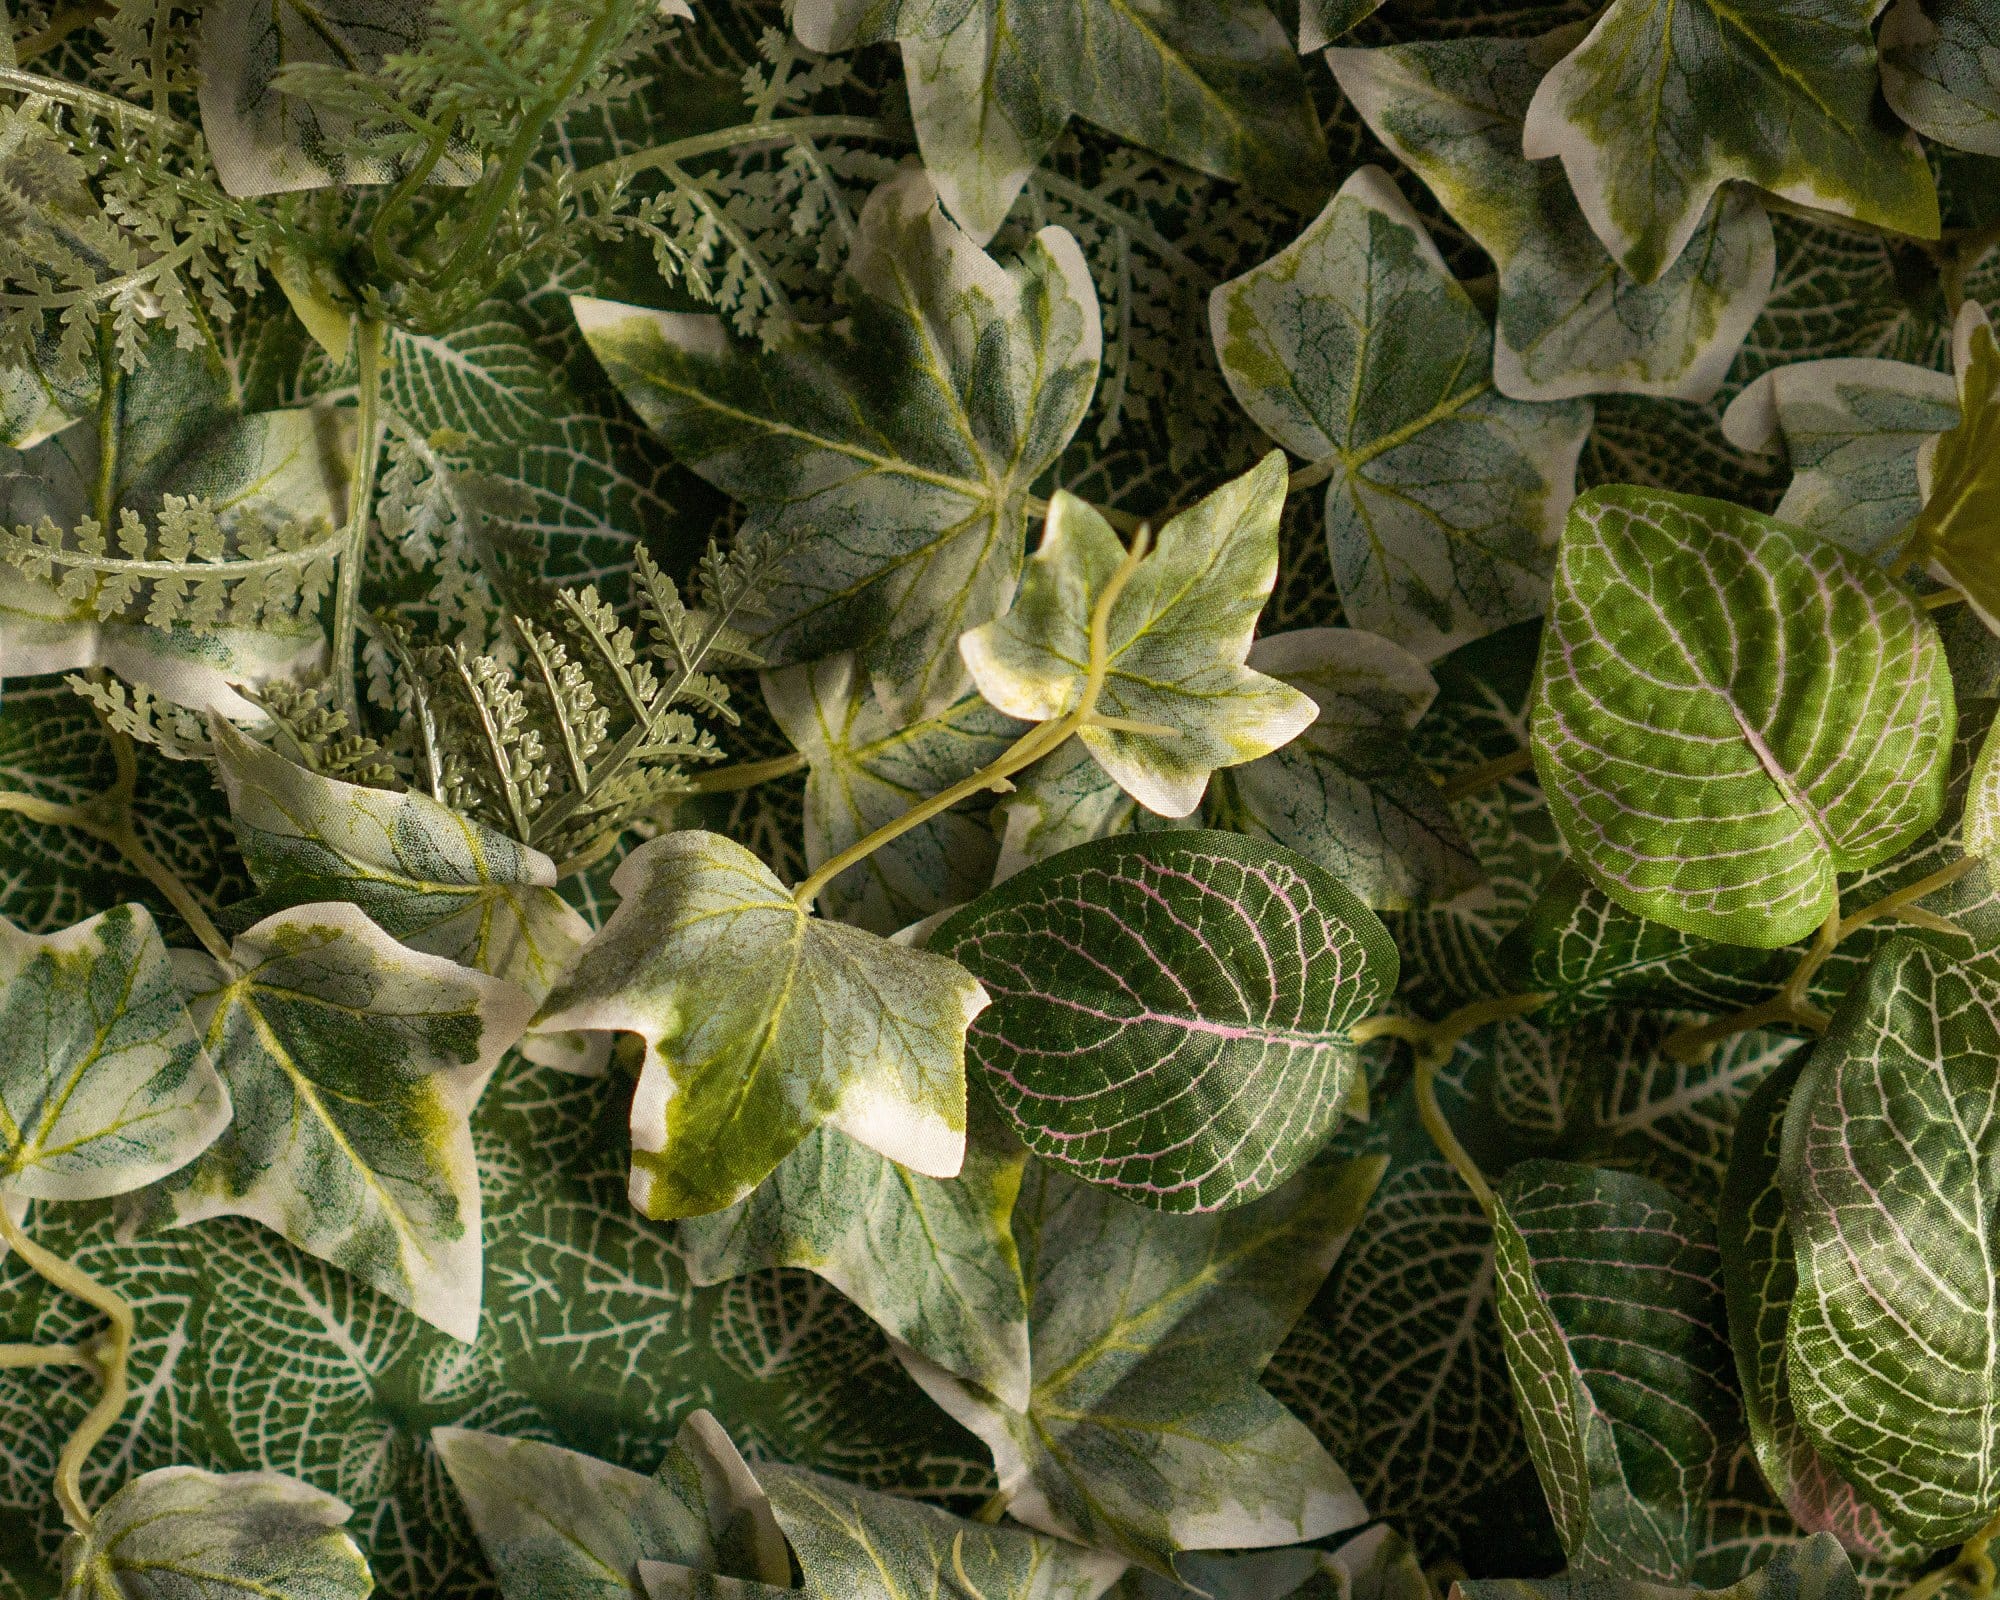 A close-up of an assortment of green leaves with various patterns and textures